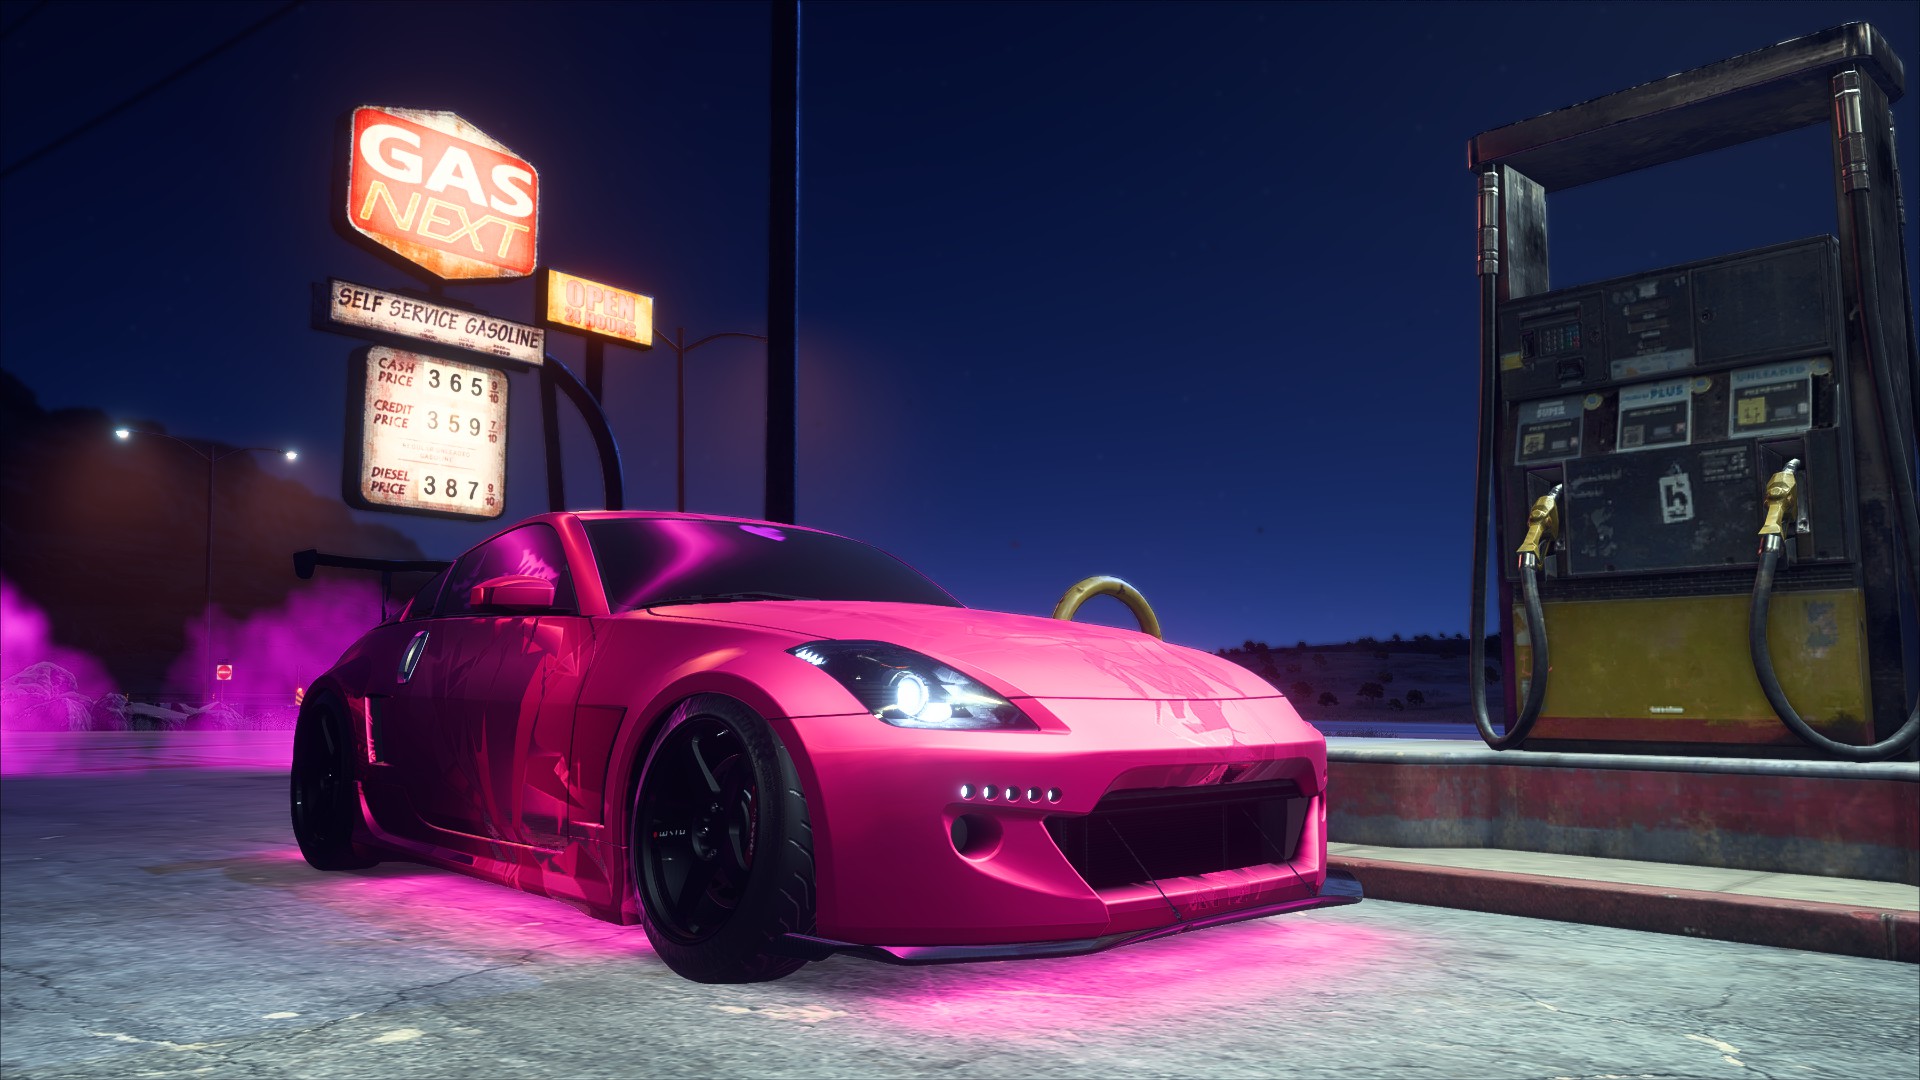 Need For Speed Need For Speed Payback Car Nissan 350Z Nissan Night Pink Cars Gas Stations Nismo Tuni 1920x1080